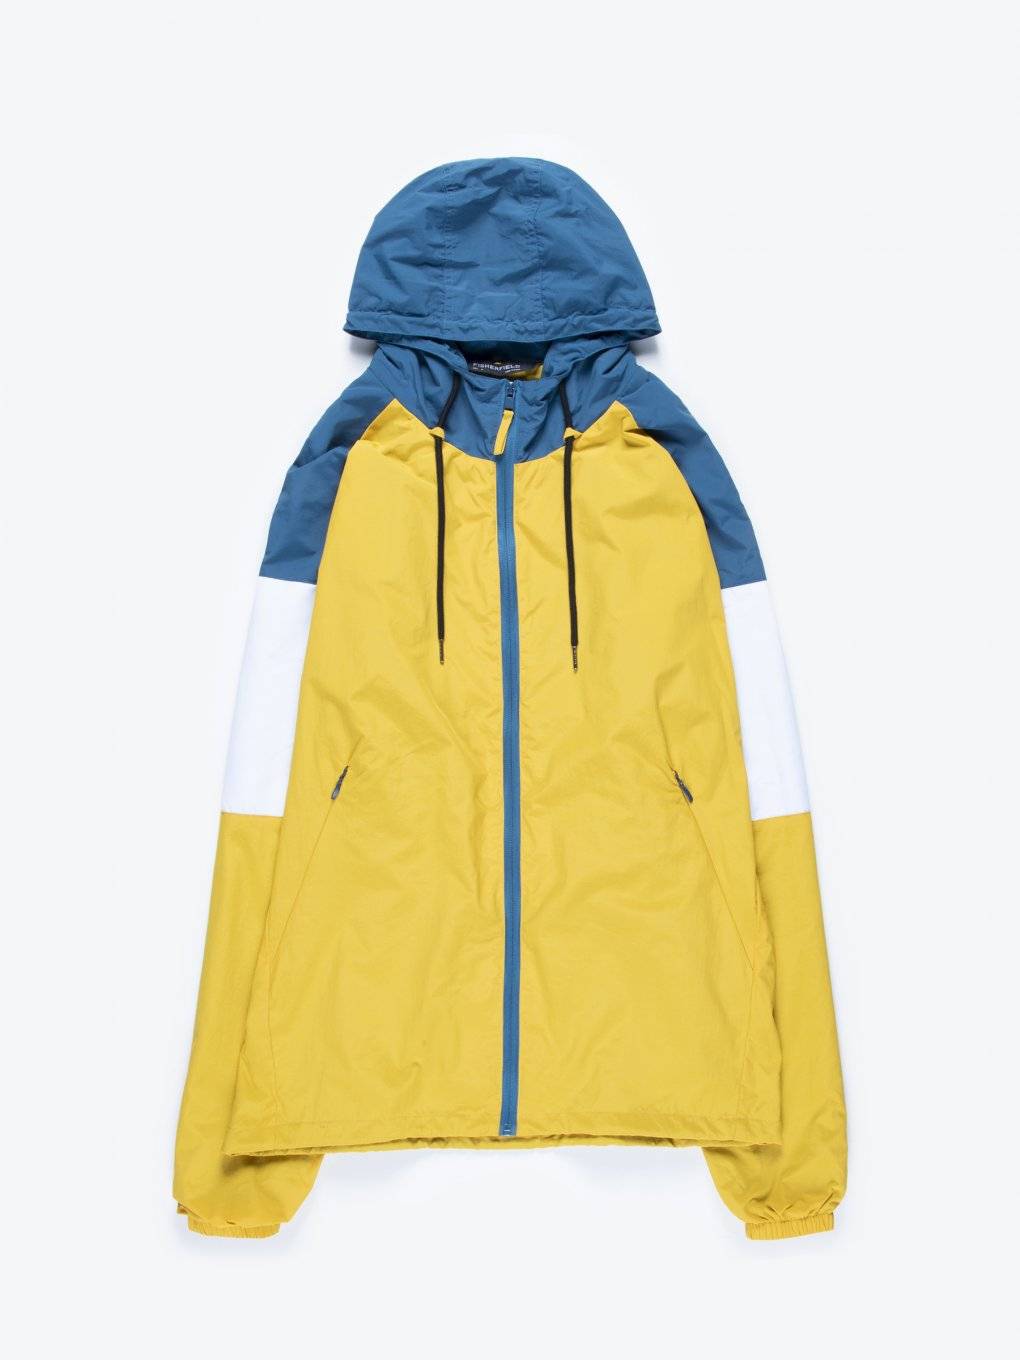 Colour block jacket with hood